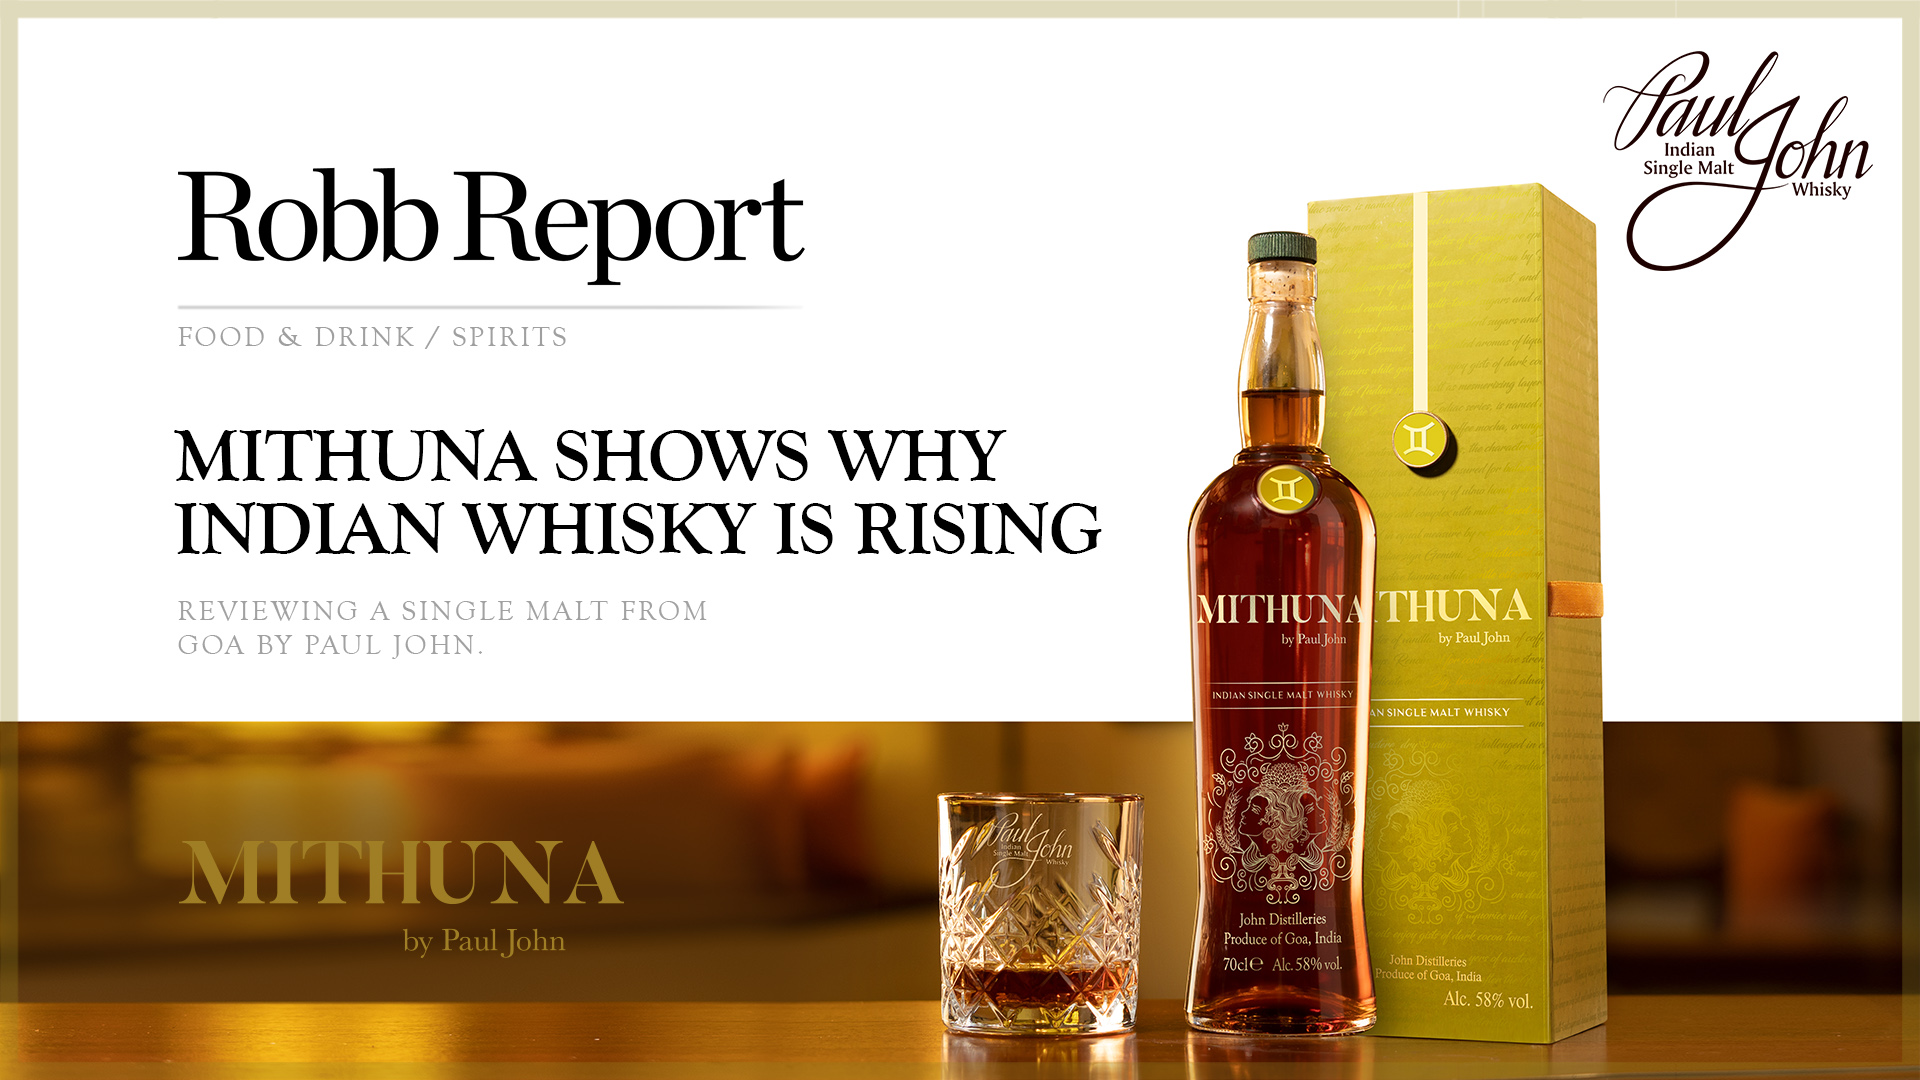 Mithuna shows why Indian whisky is rising by Robb Report 